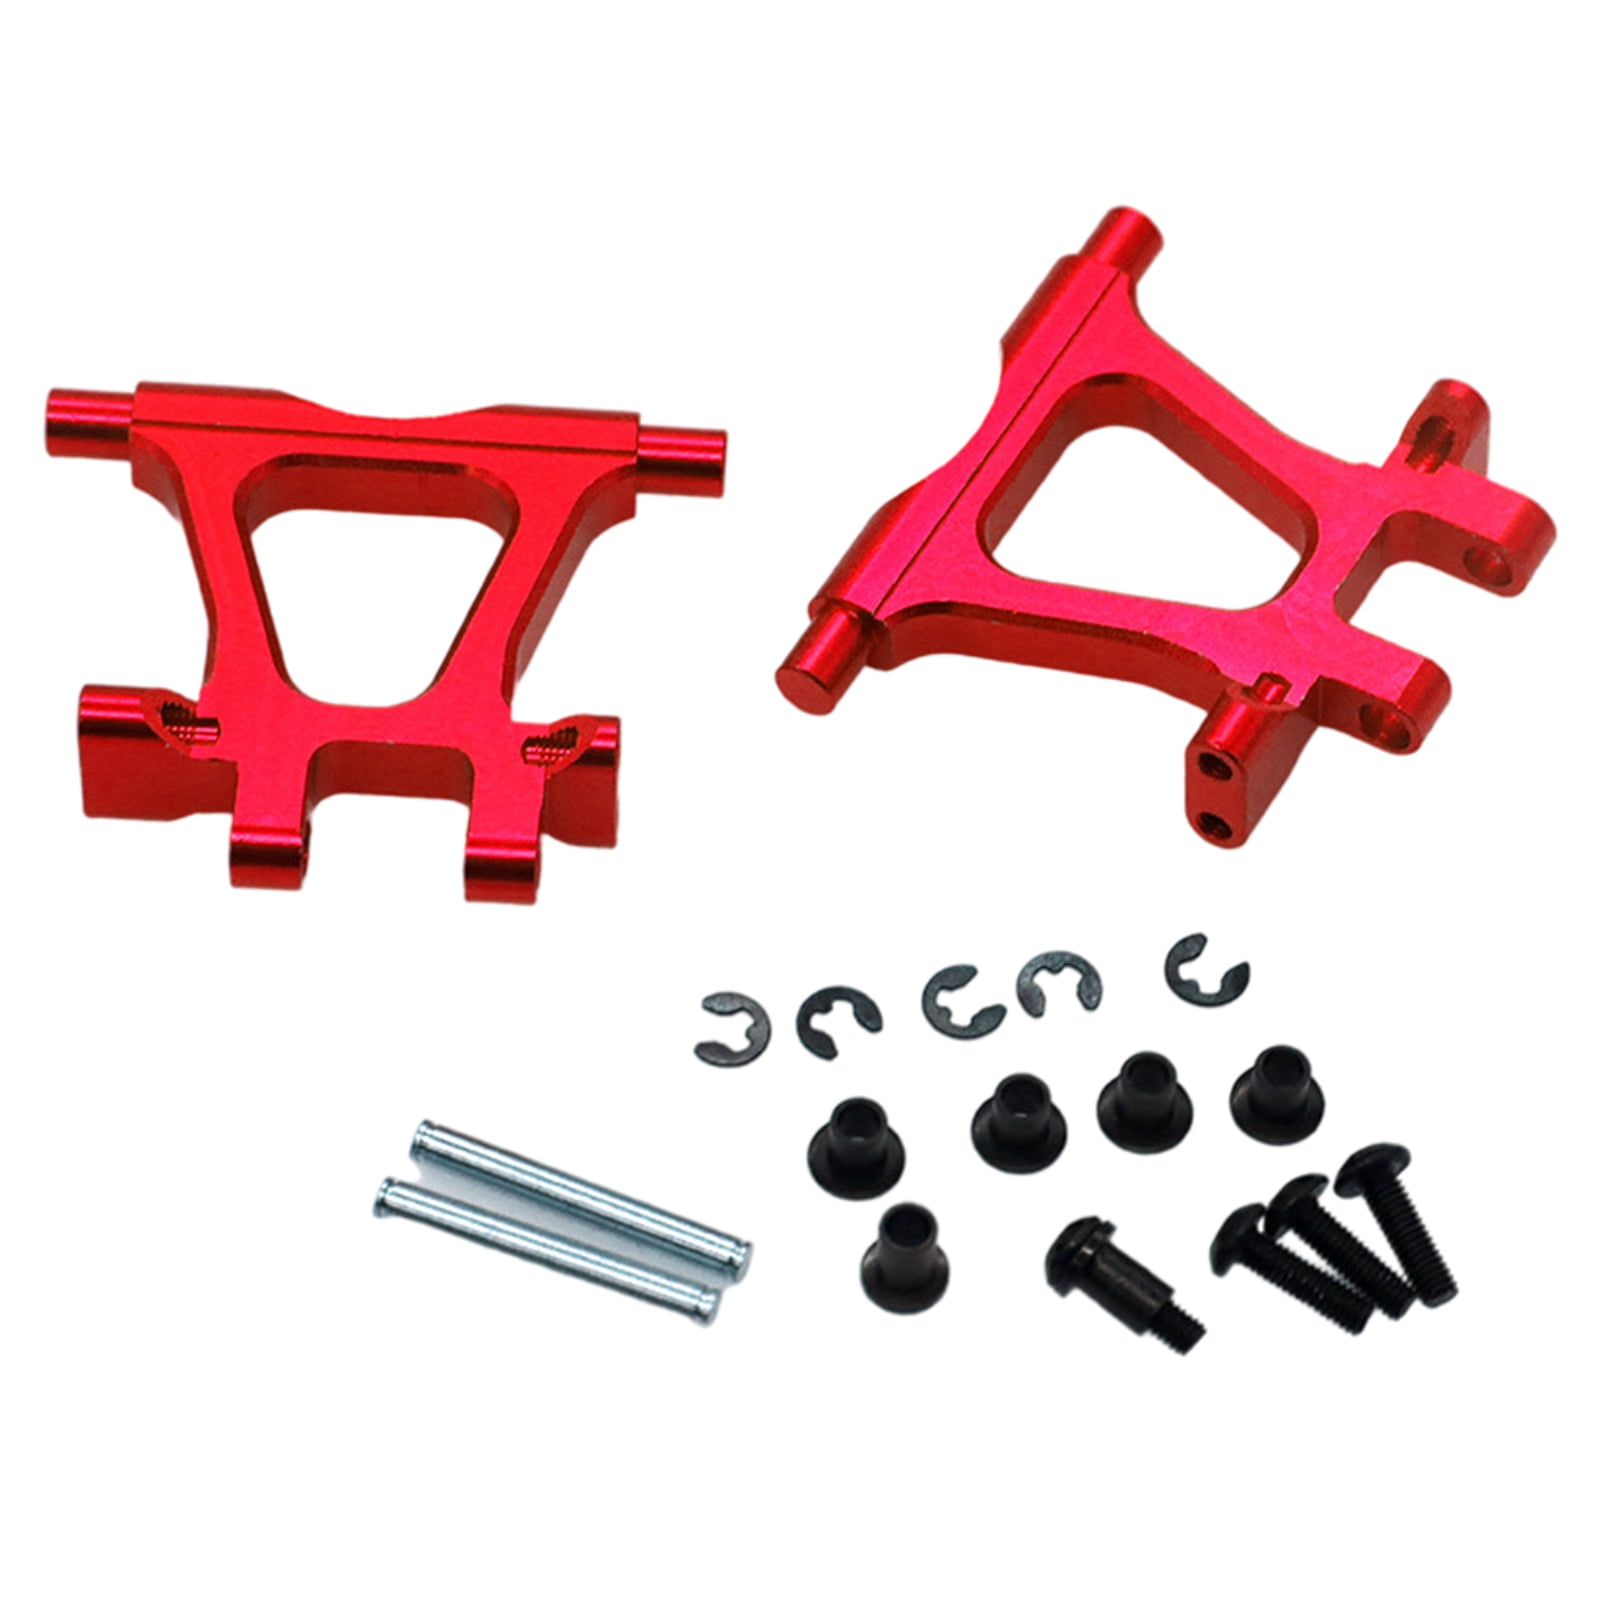 1/10 New RC Rock Crawler Accessory Tool Set for RC Crawler Truck Upgrade Parts